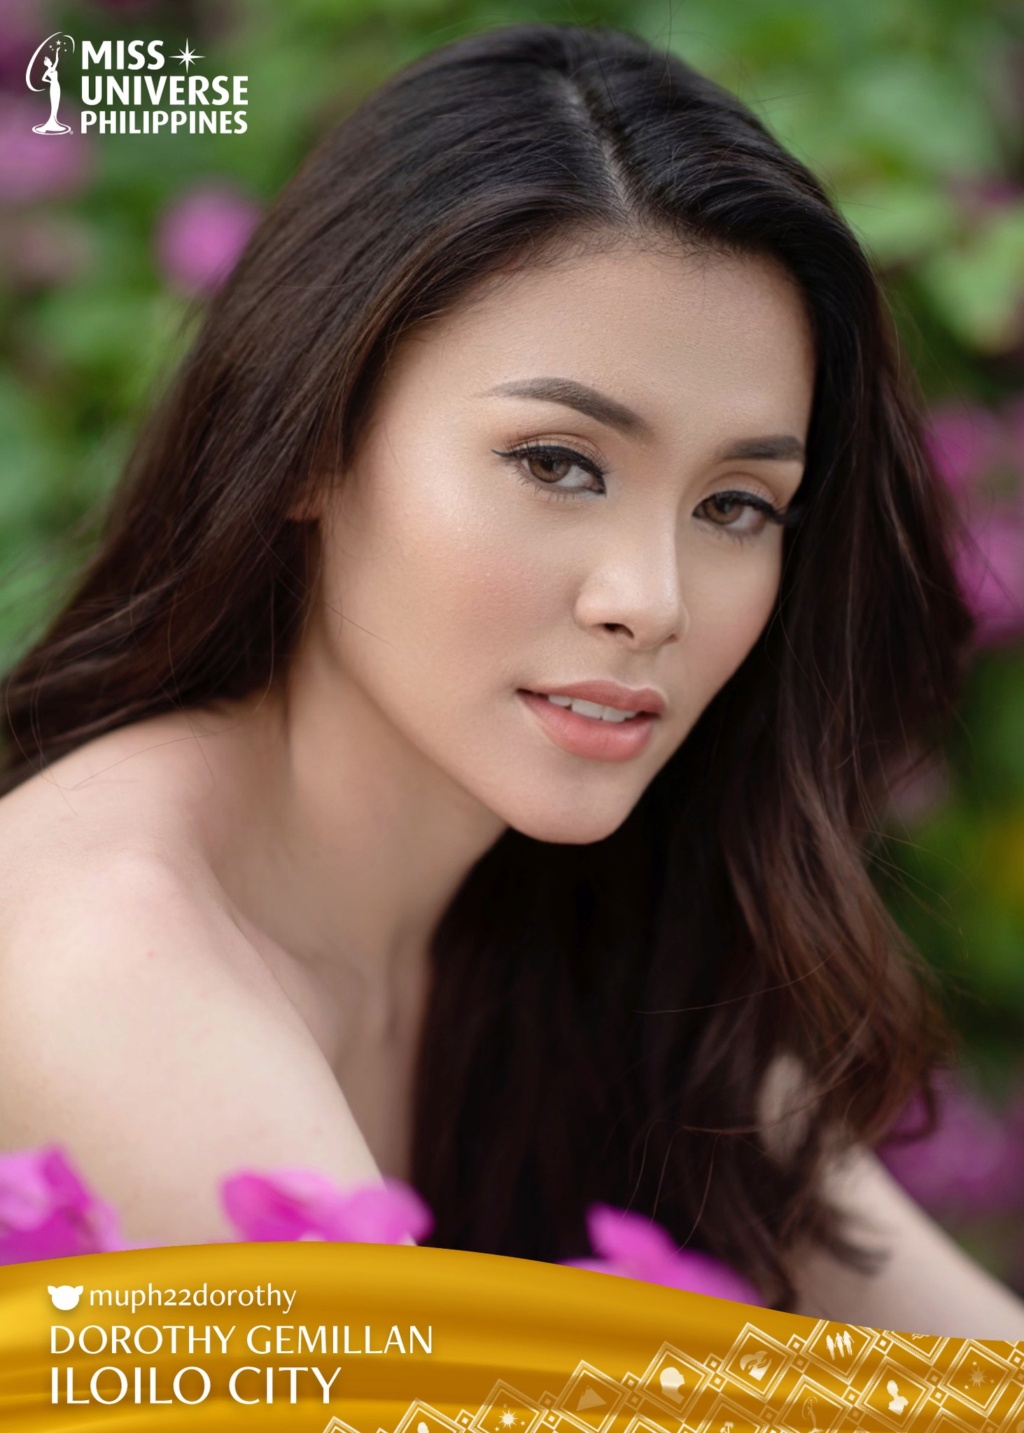 ROAD TO MISS UNIVERSE PHILIPPINES 2022 is is Miss Pasay, Celeste Cortesi - Page 5 27559416